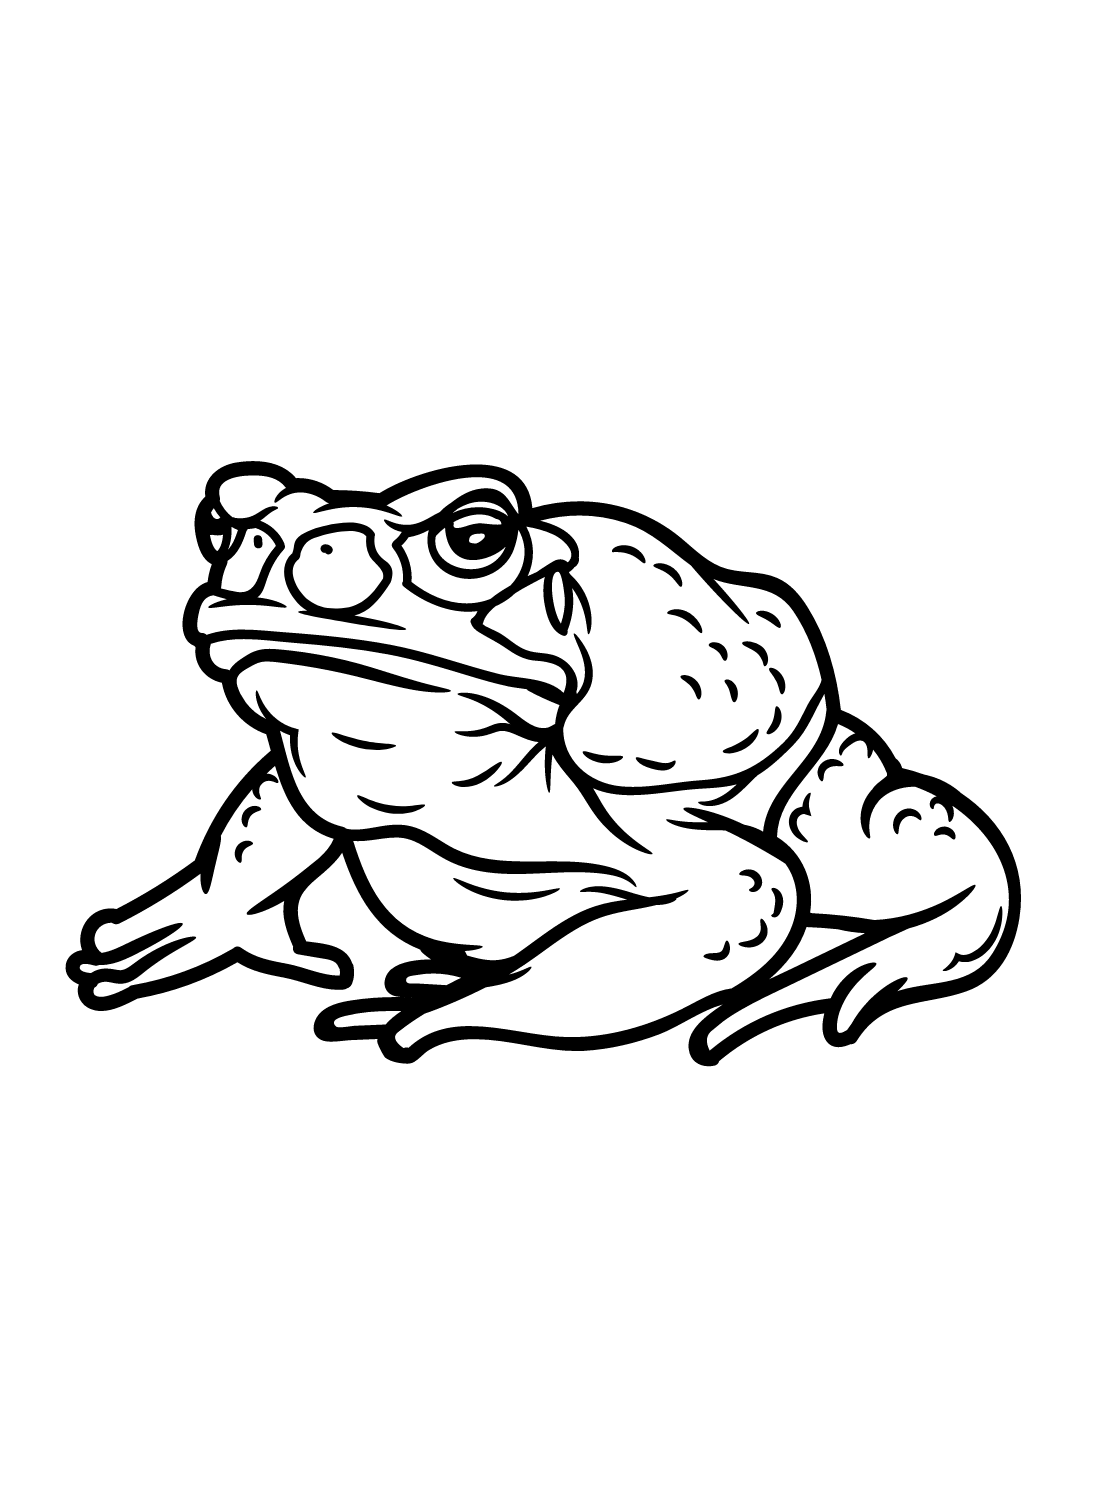 Toad Simple from Toad